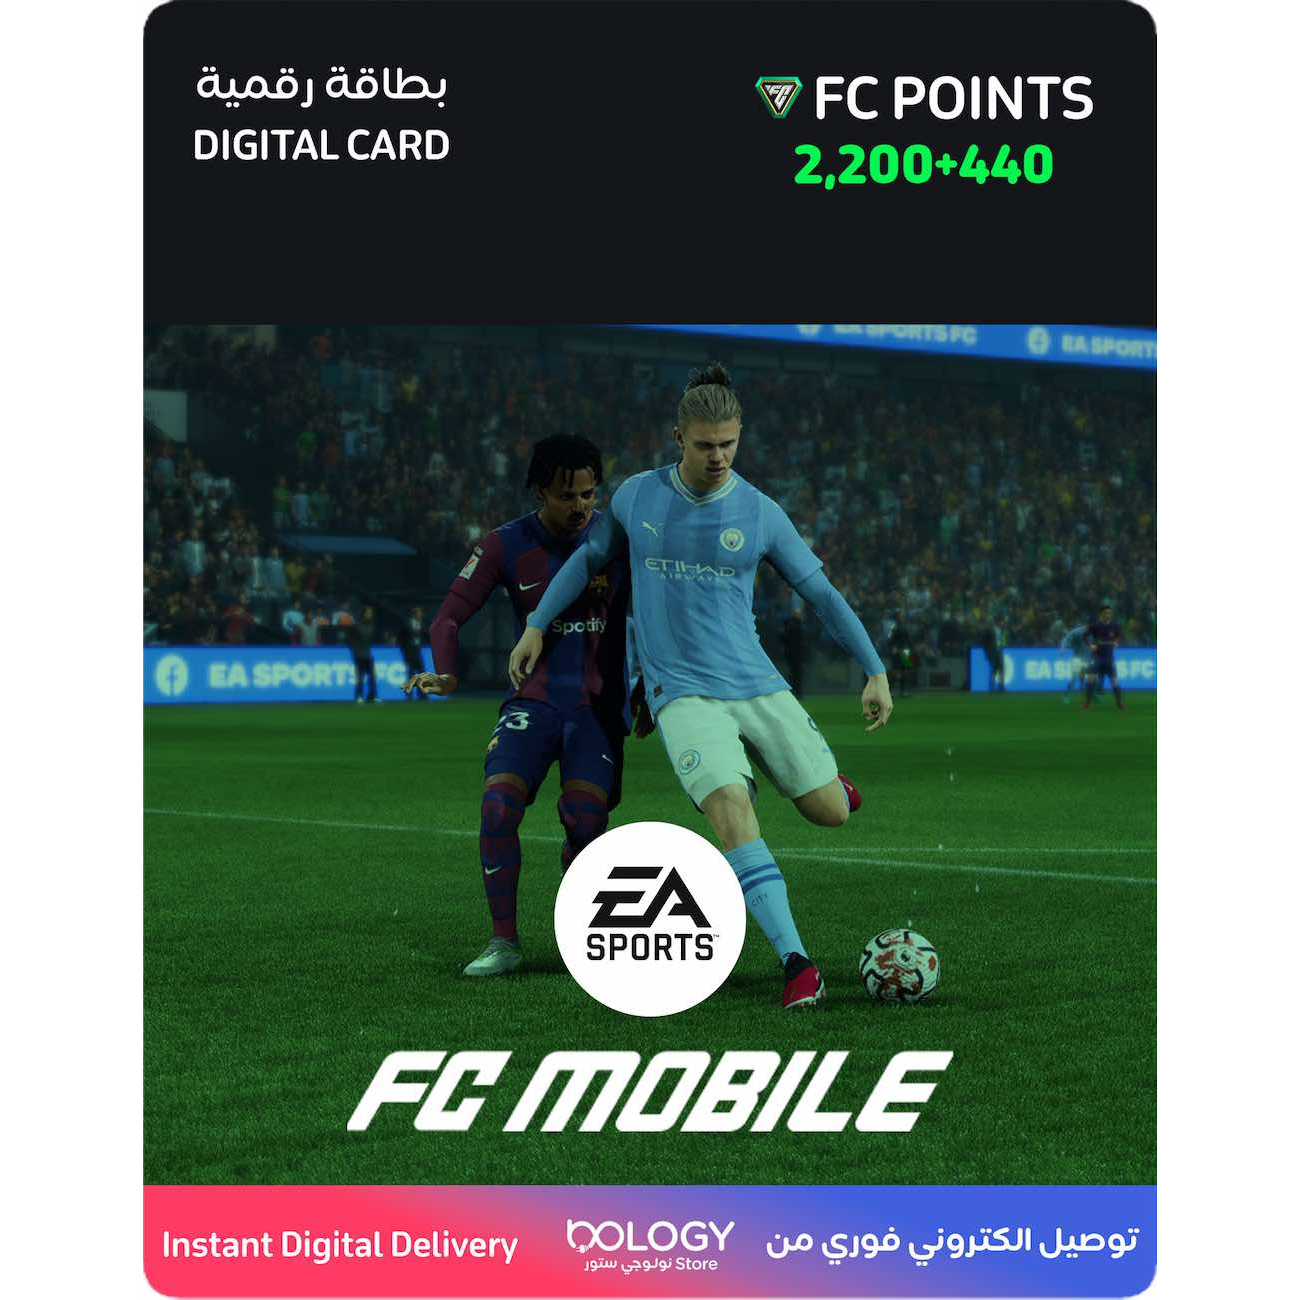 EA FC mobile - How to download beta